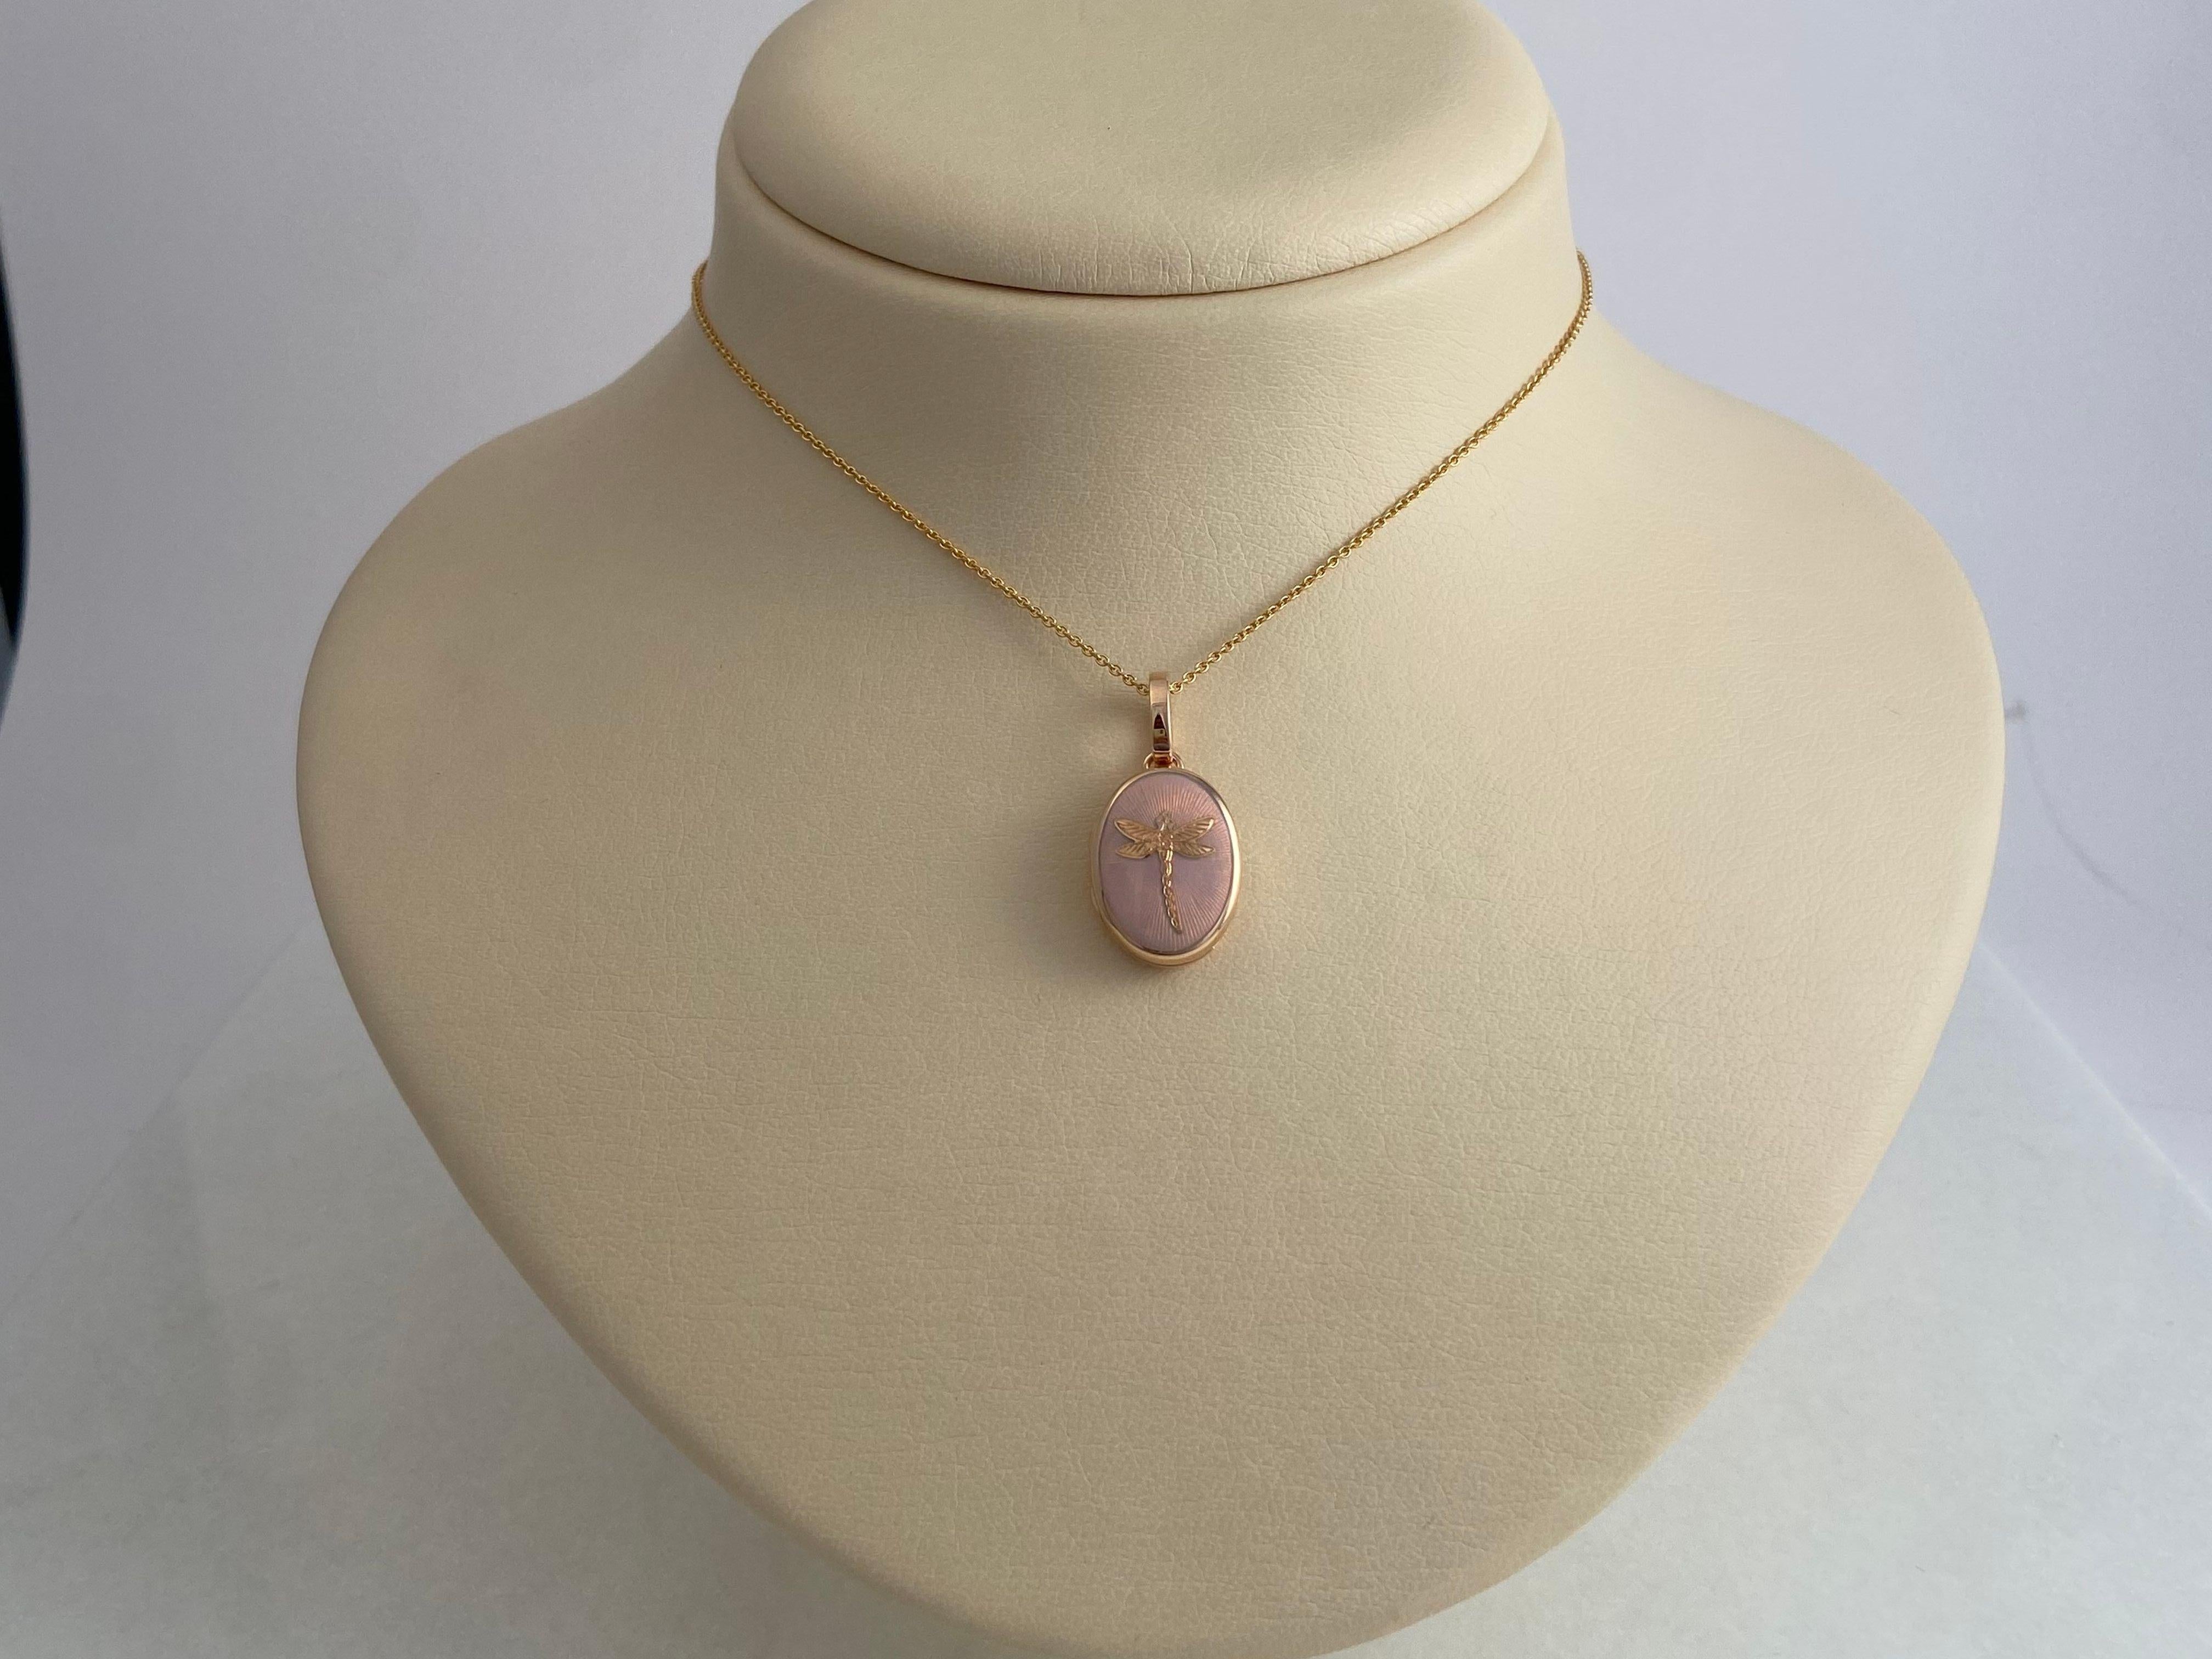 Oval Locket Pendant Necklace Dragonfly - 18k Rose Gold - Opalescent Pink Enamel In New Condition For Sale In Pforzheim, DE